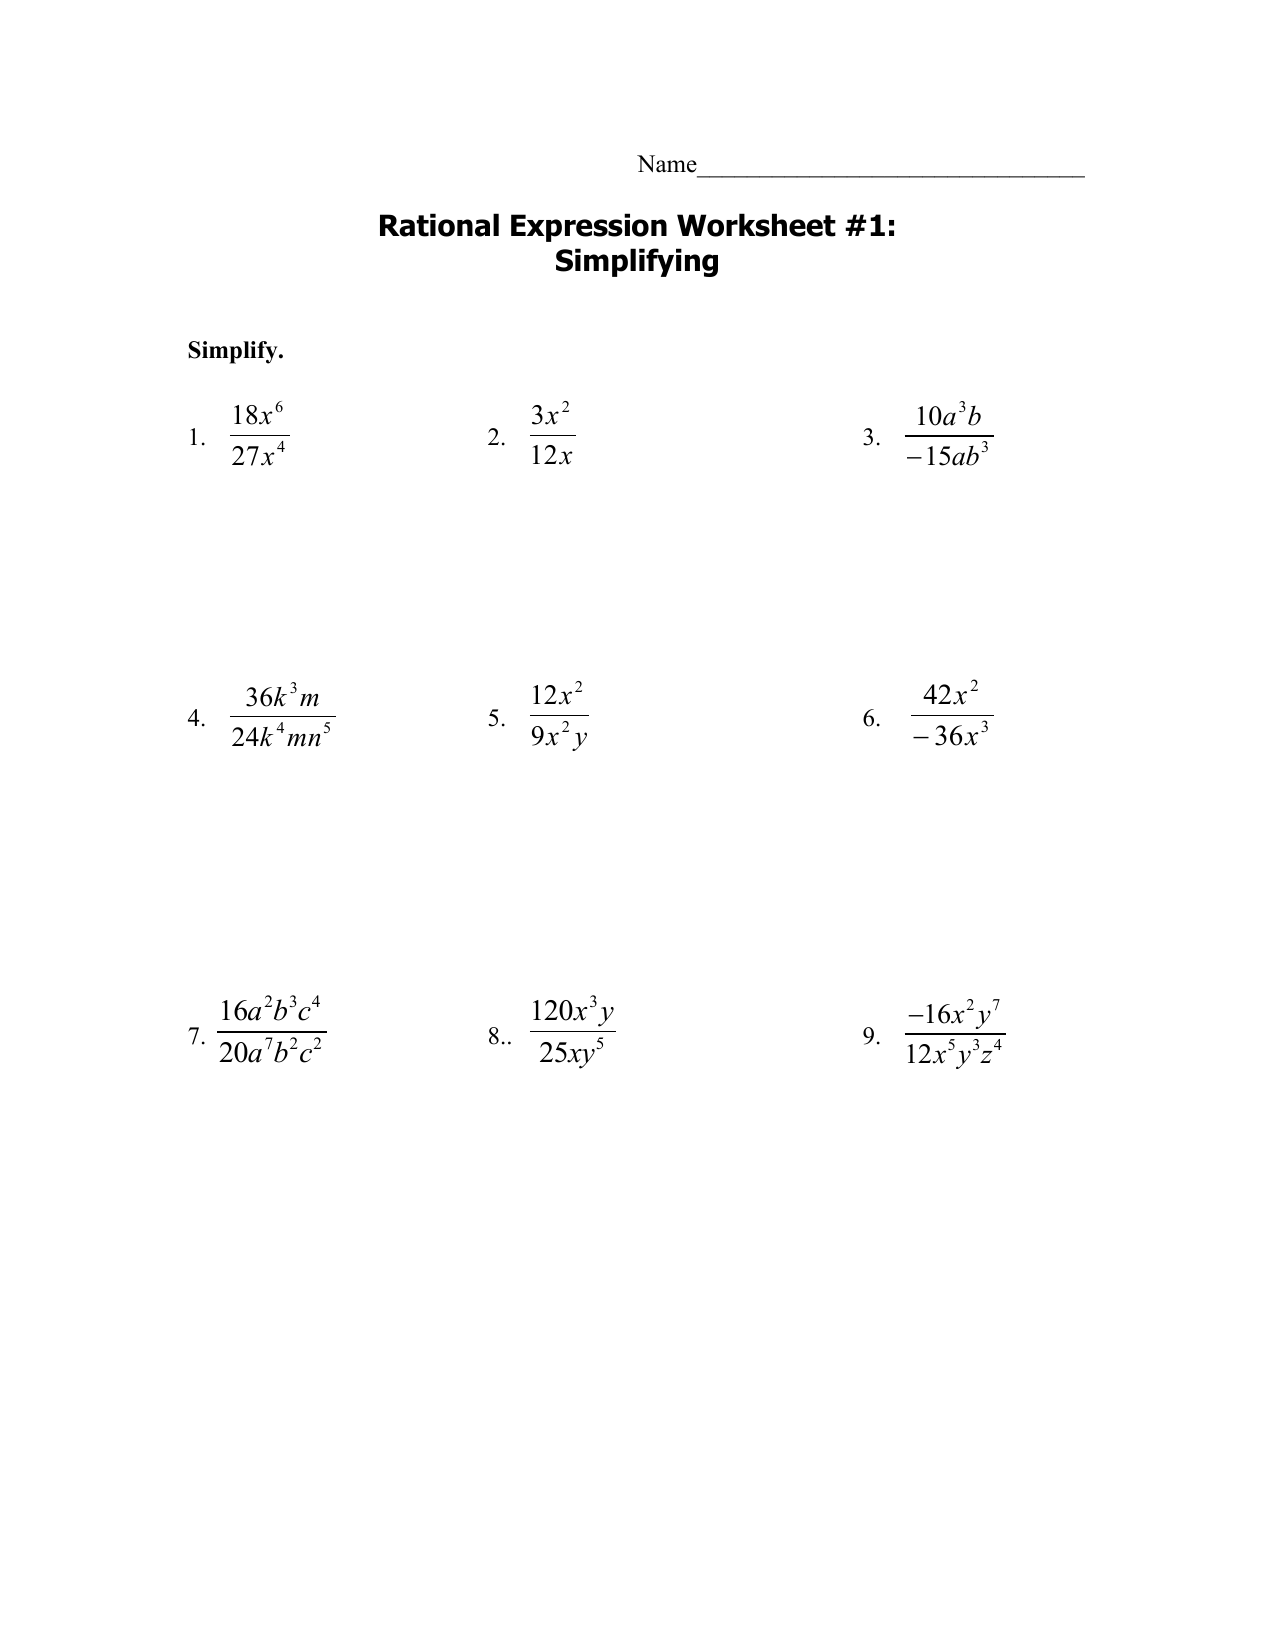 M22 rationalworksheets22-225 22 Pertaining To Rational Expressions Worksheet Answers